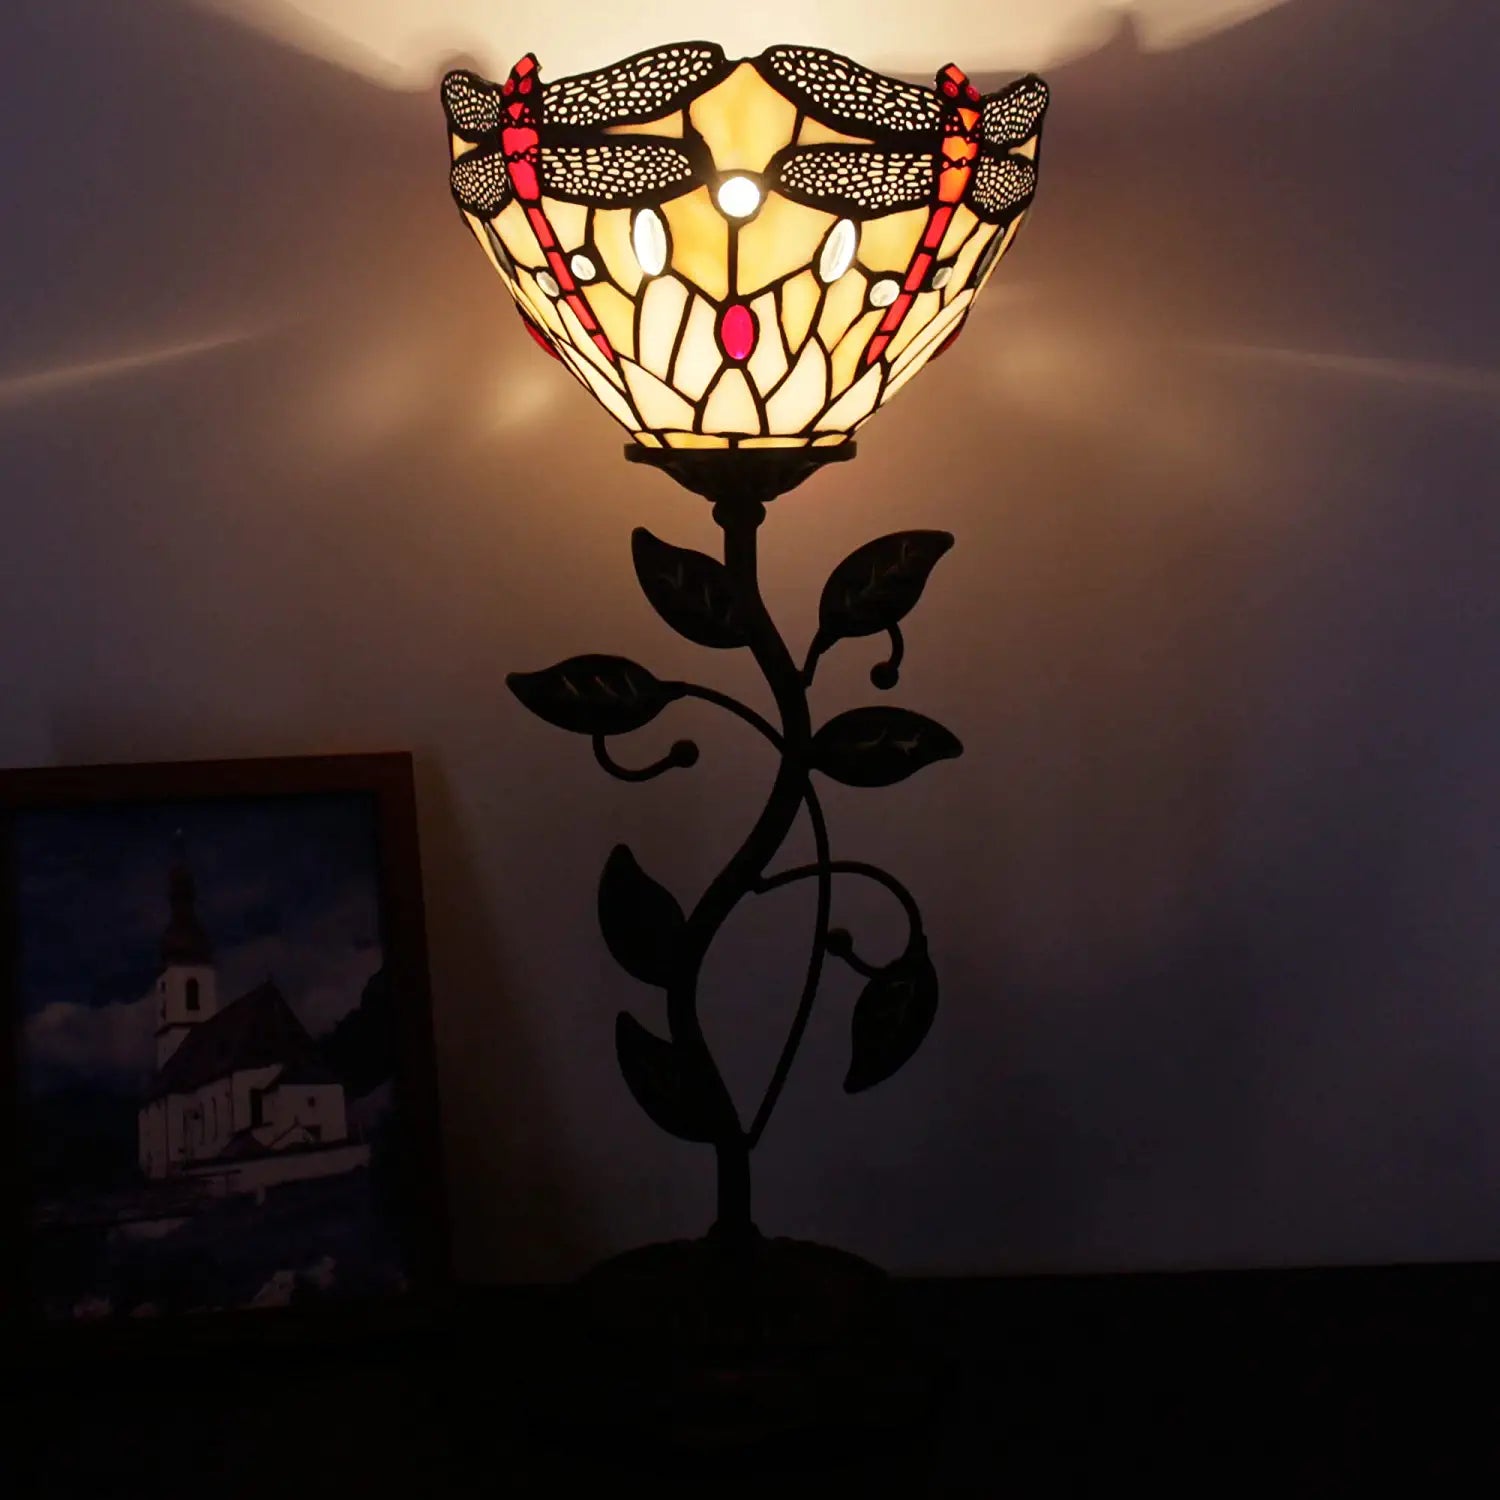 WERFACTORY Small Tiffany Table Lamp 8" Amber Stained Glass Dragonfly Style Shade 19" Tall Antique Vintage Metal Leaf Base Mini Bedside Accent Desk Torchiere Uplight